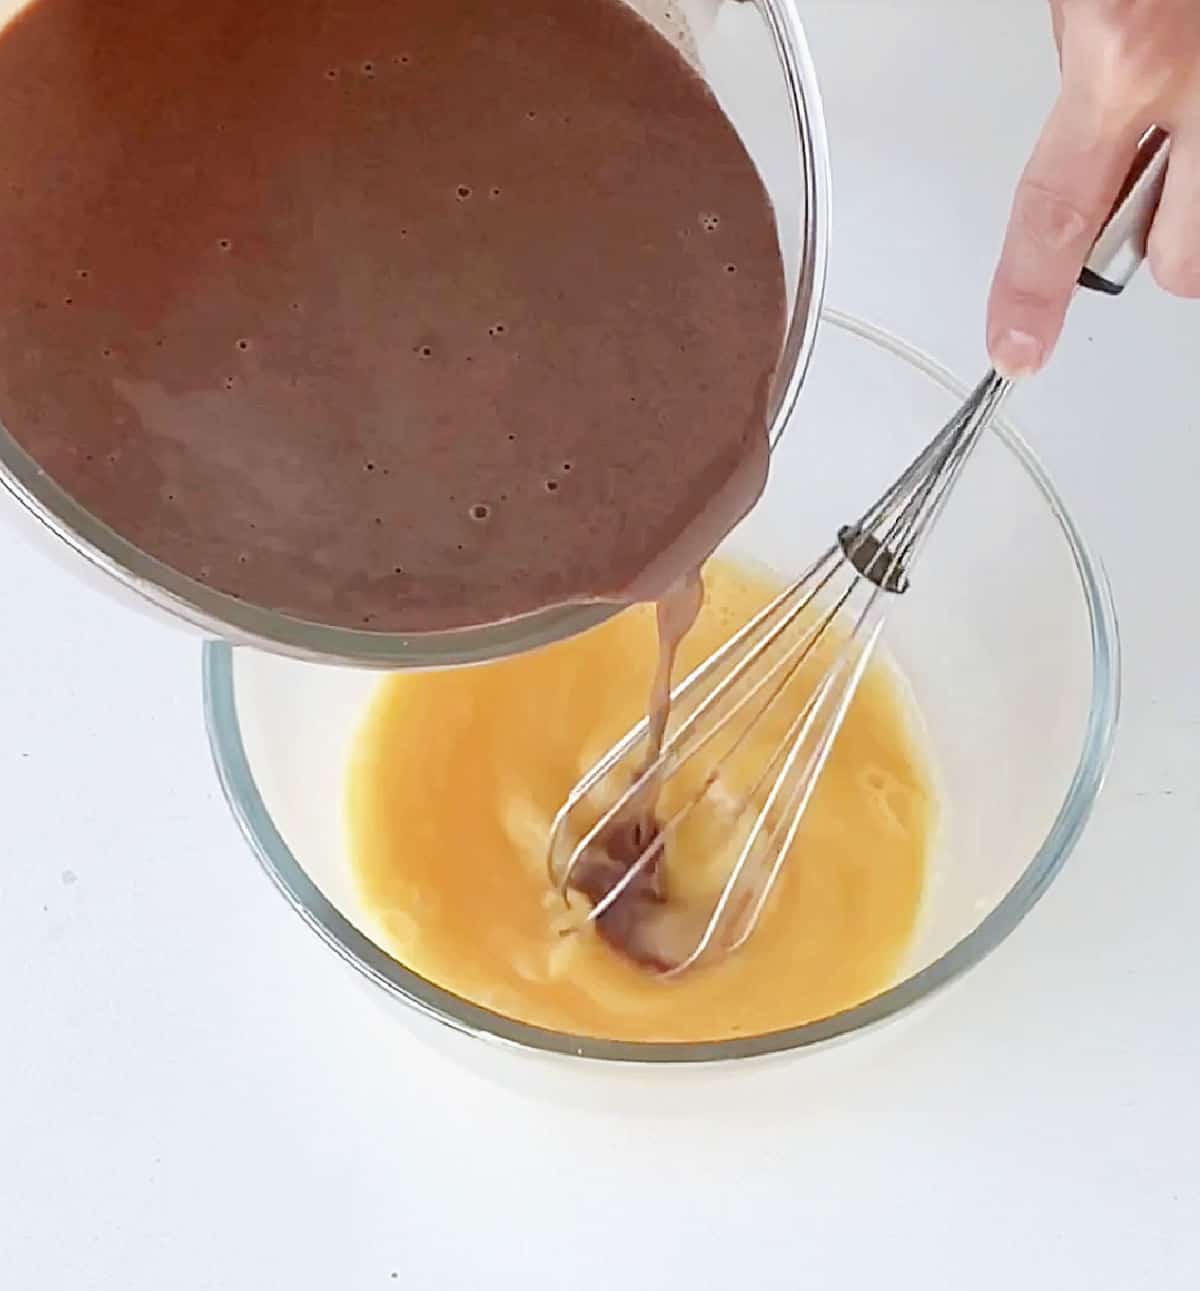 A chocolate custard being poured over beaten eggs in a glass bowl on a white surface. A hand with a whisk.